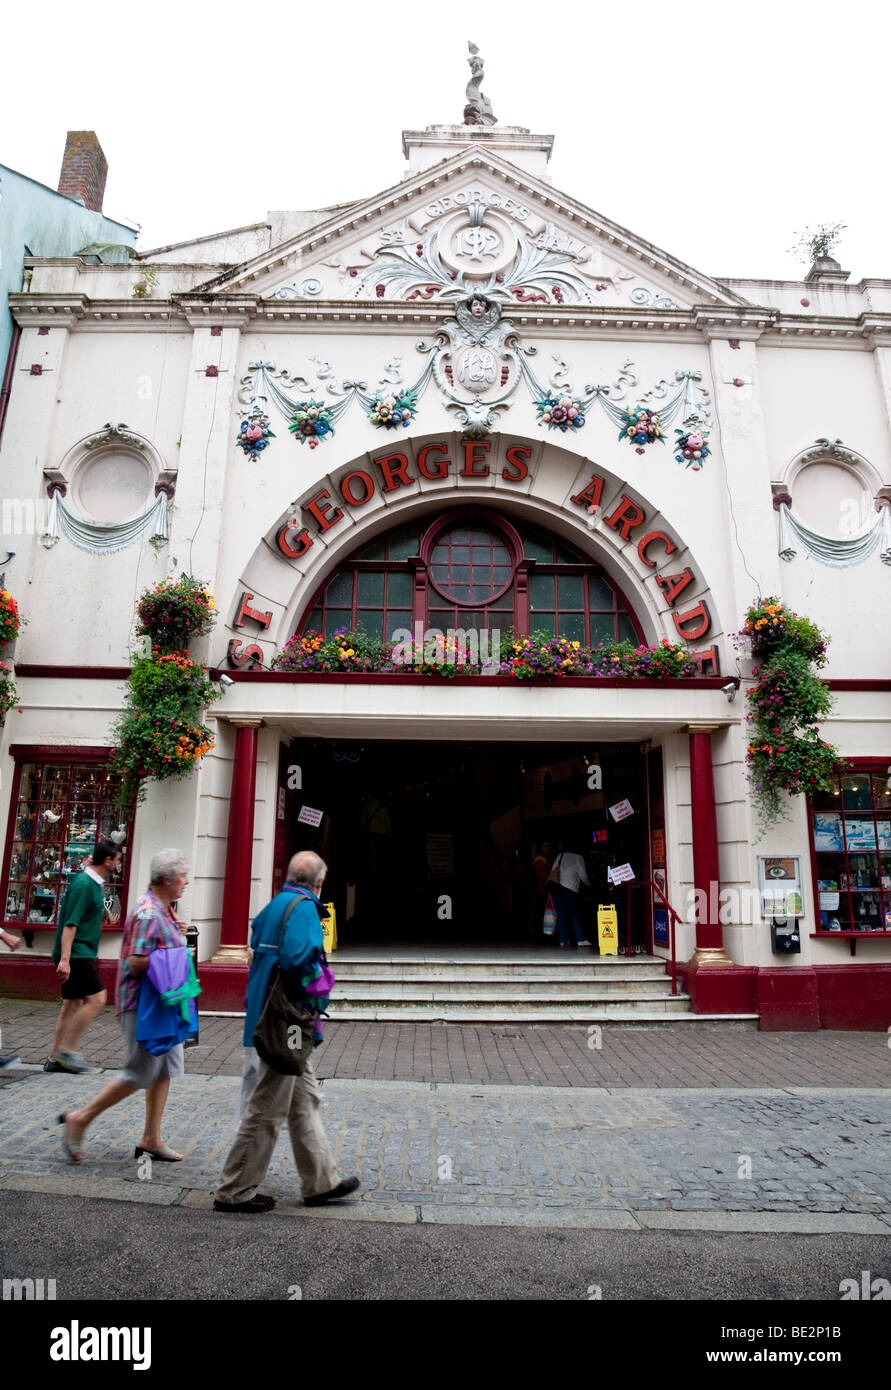 St George's  Arcade in Falmouth, Cornwall, United Kingdom. Stock Photo